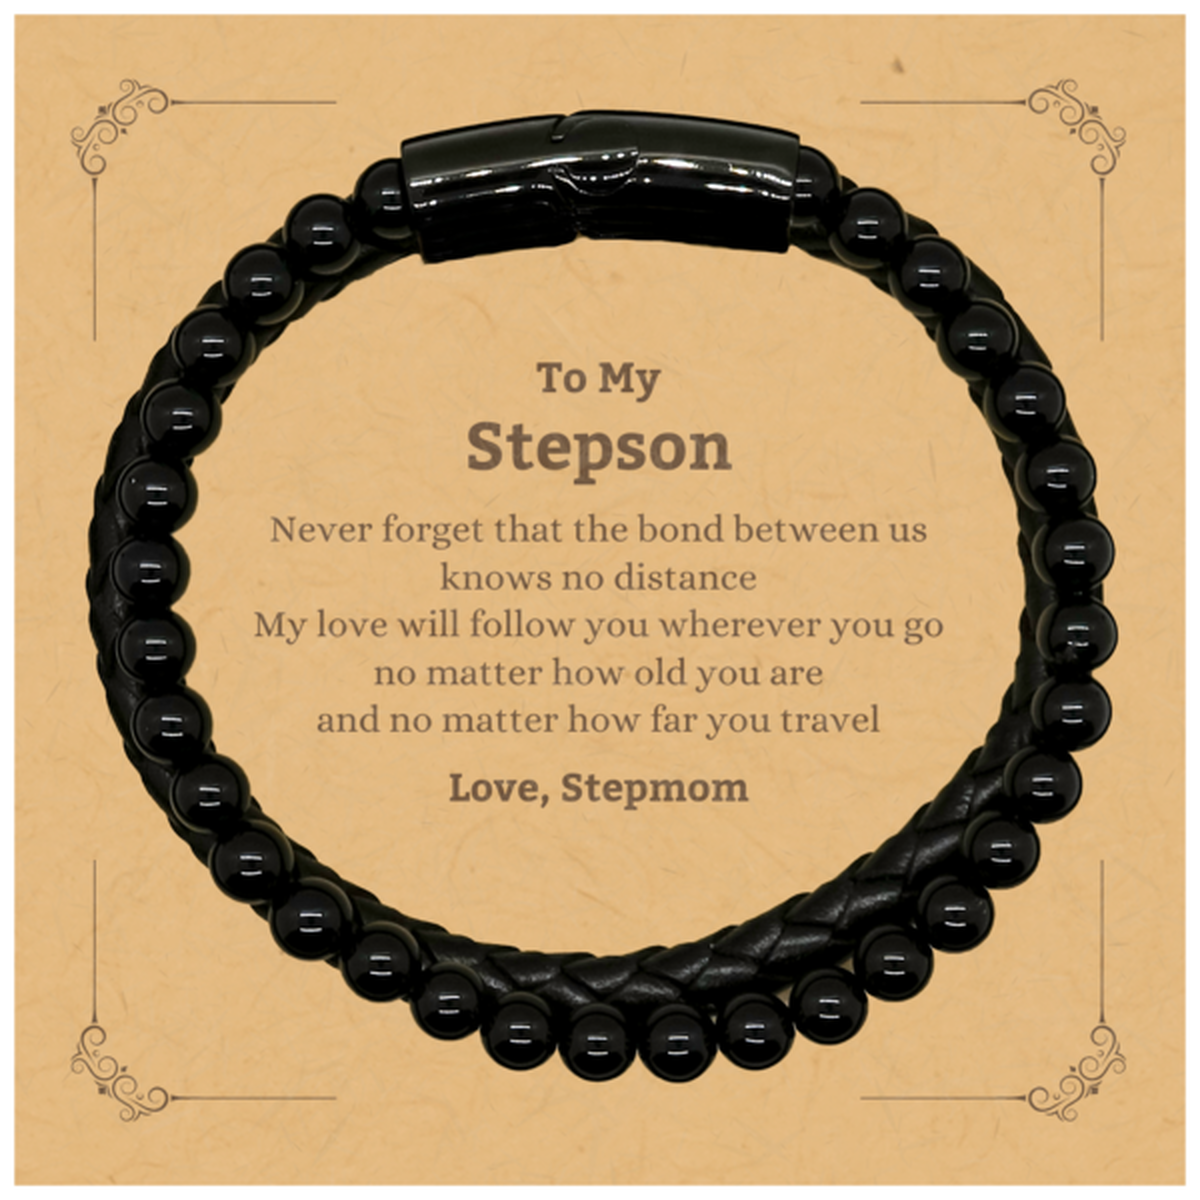 Stepson Birthday Gifts from Stepmom, Adjustable Stone Leather Bracelets for Stepson Christmas Graduation Unique Gifts Stepson Never forget that the bond between us knows no distance. Love, Stepmom